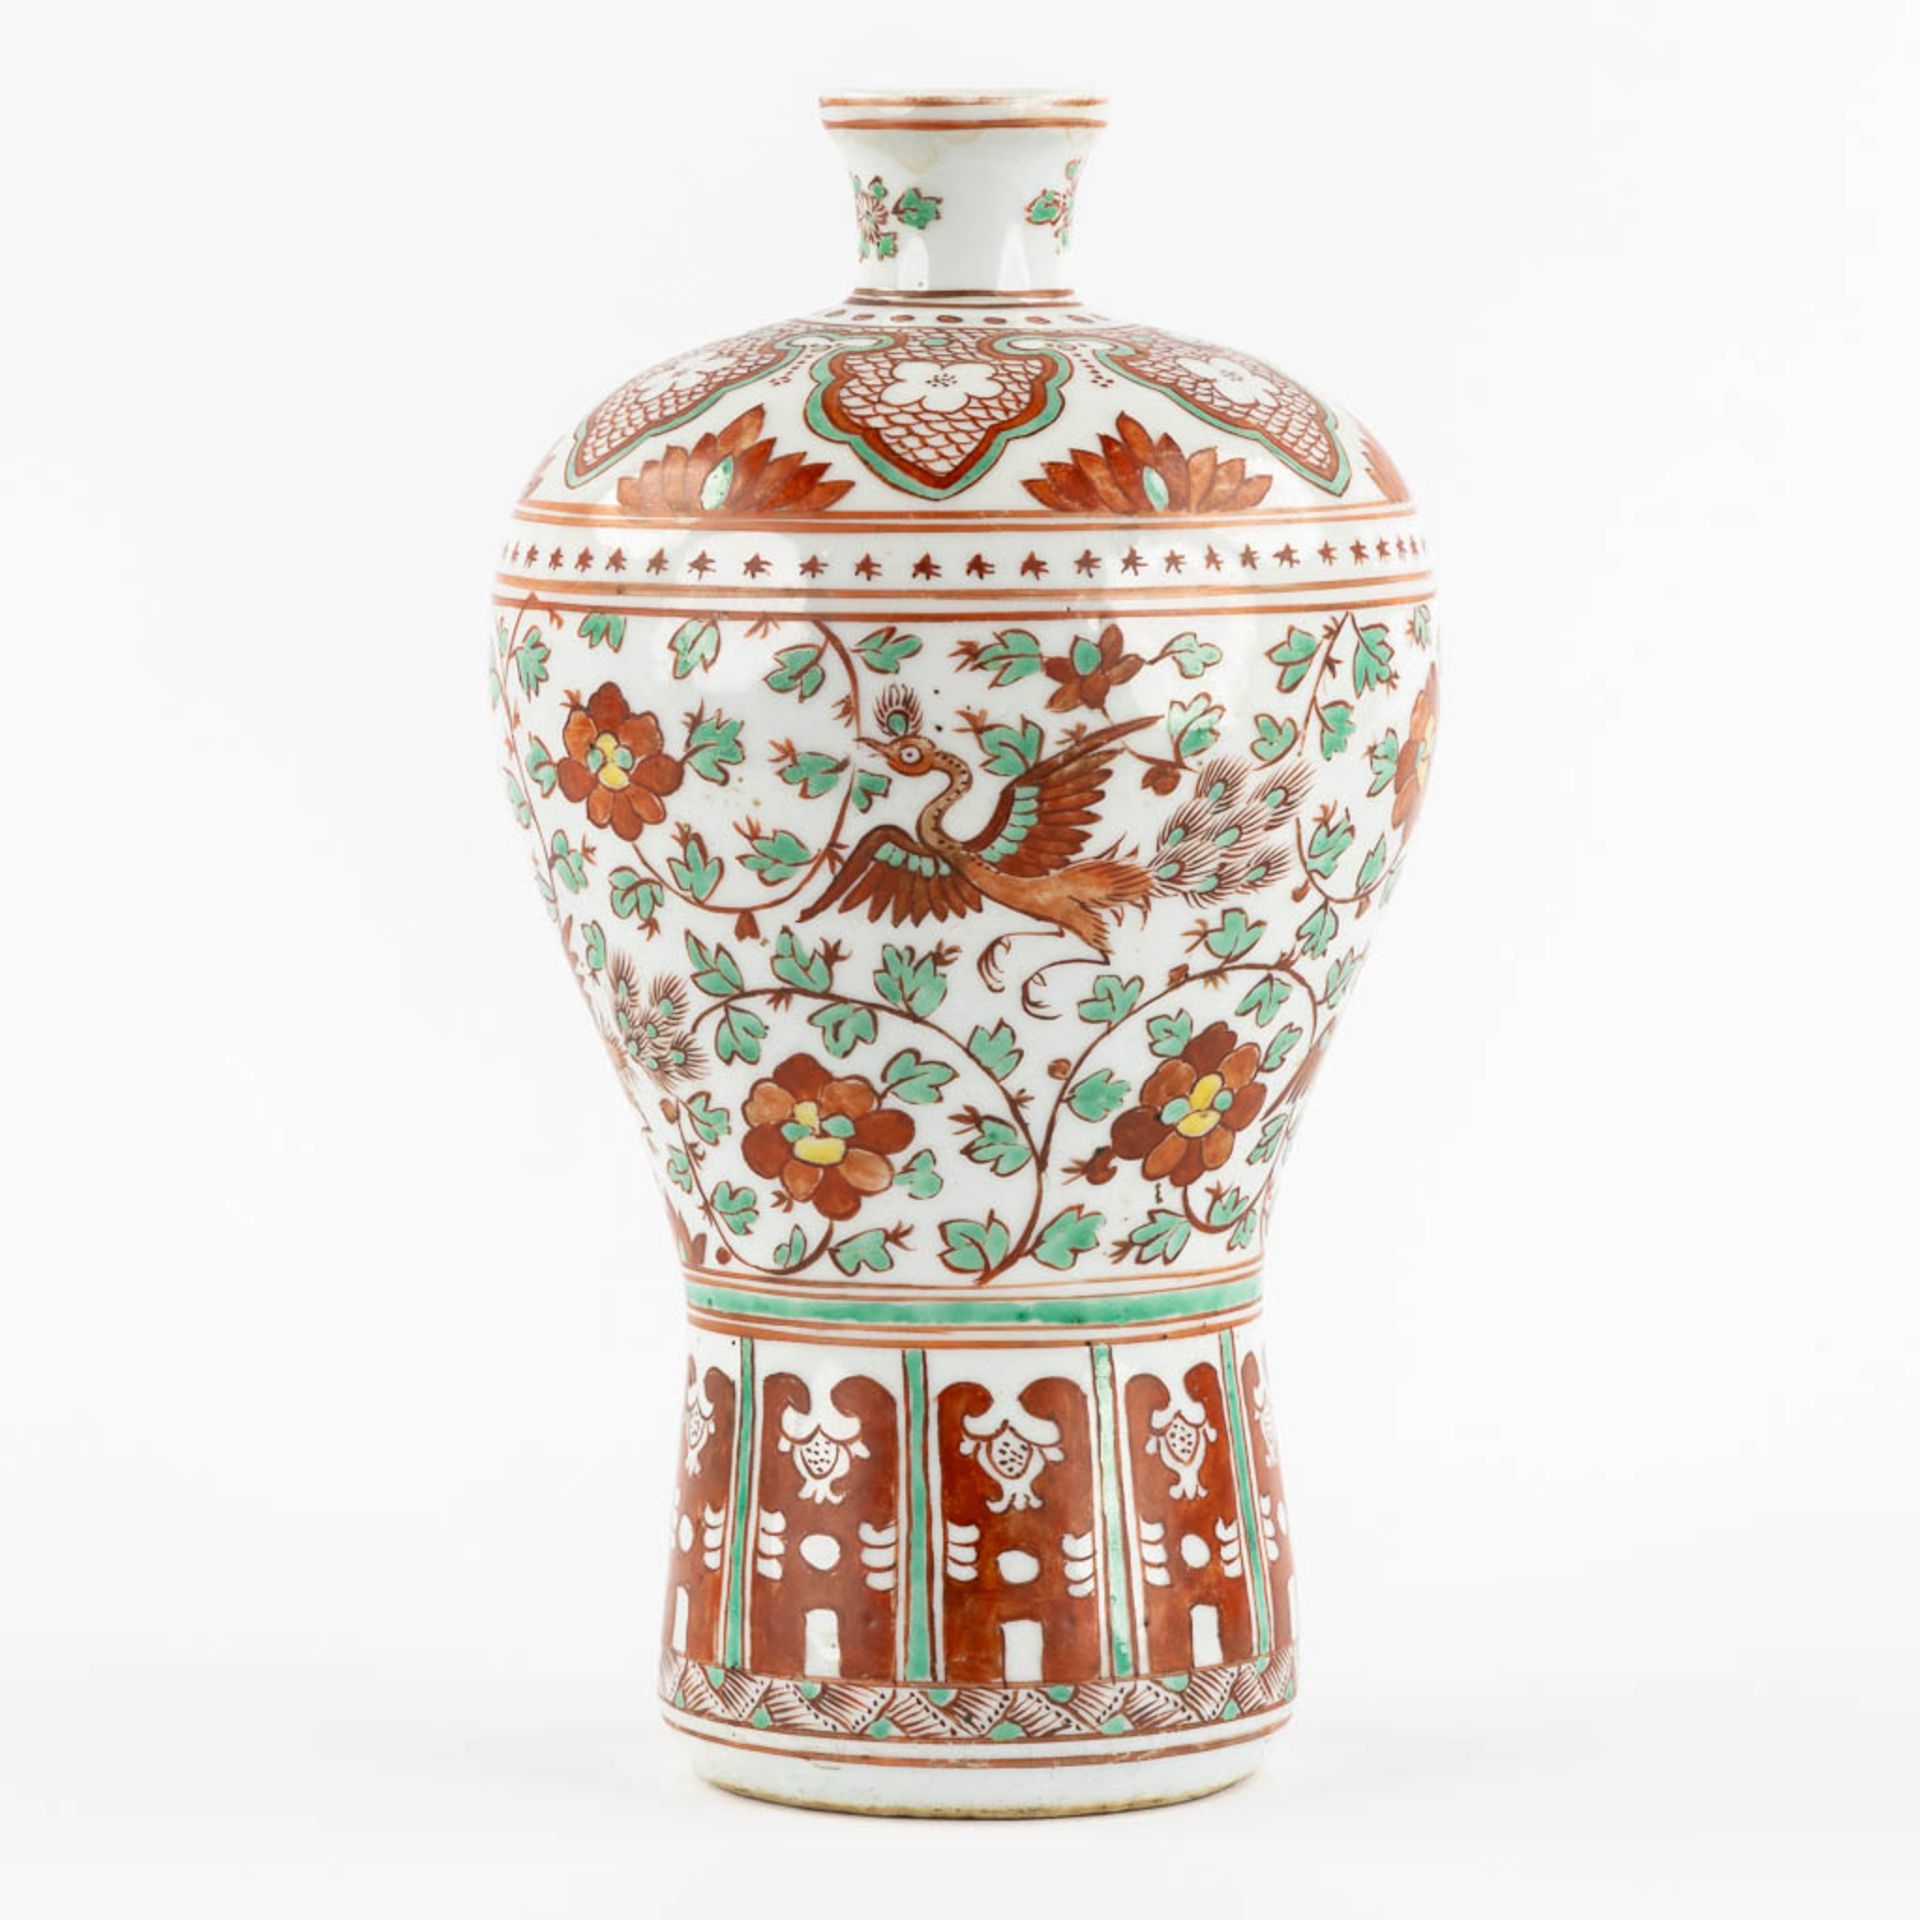 A Chinese Meiping vase, Famille verte decorated with Phoenix. 20th C. (H:31 x D:18 cm)